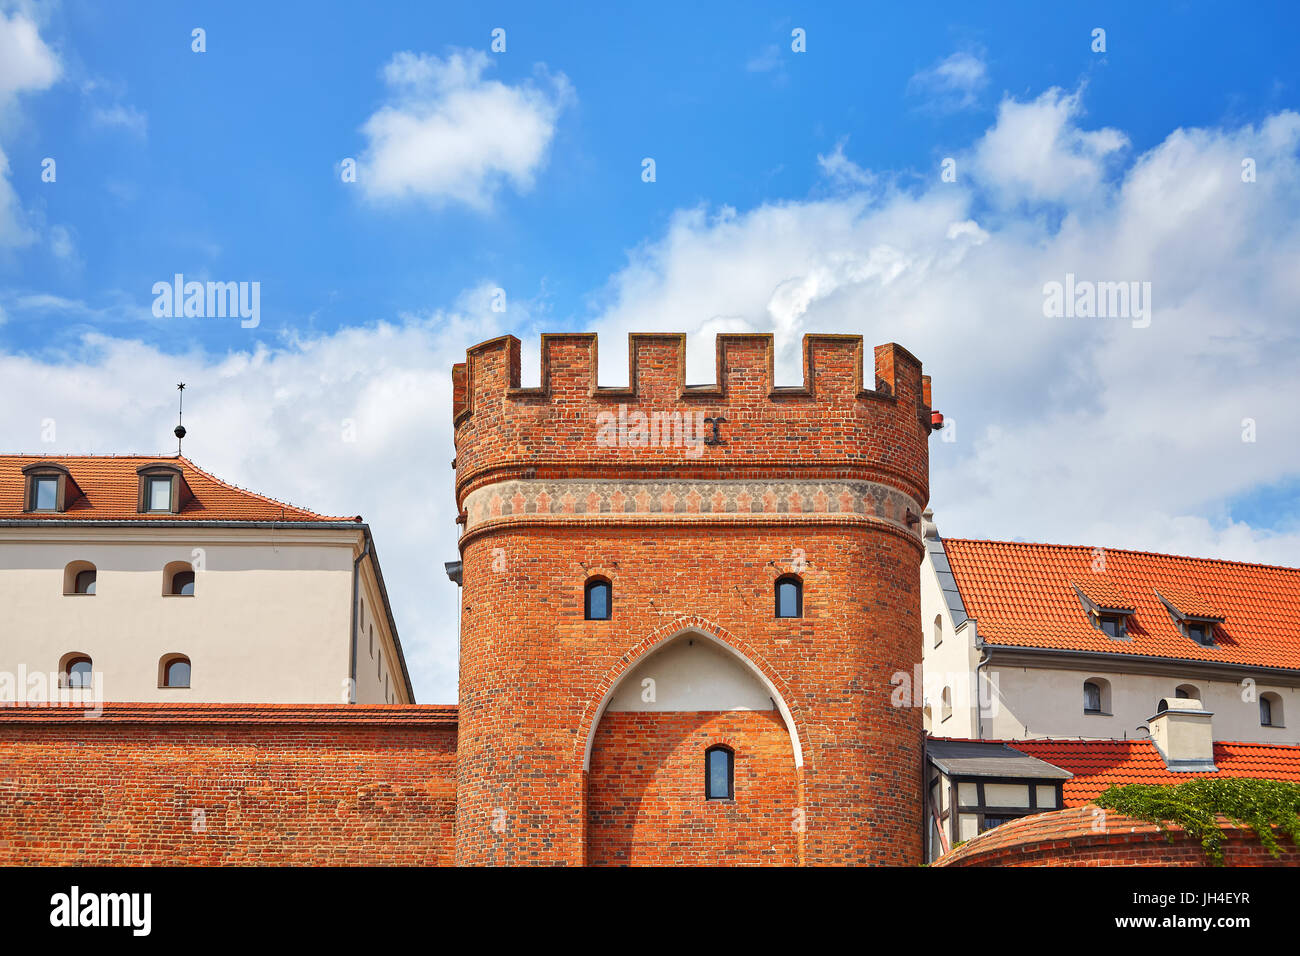 Bridge Gate to the Old Town in Torun, medieval city wall fortification, Poland. Stock Photo